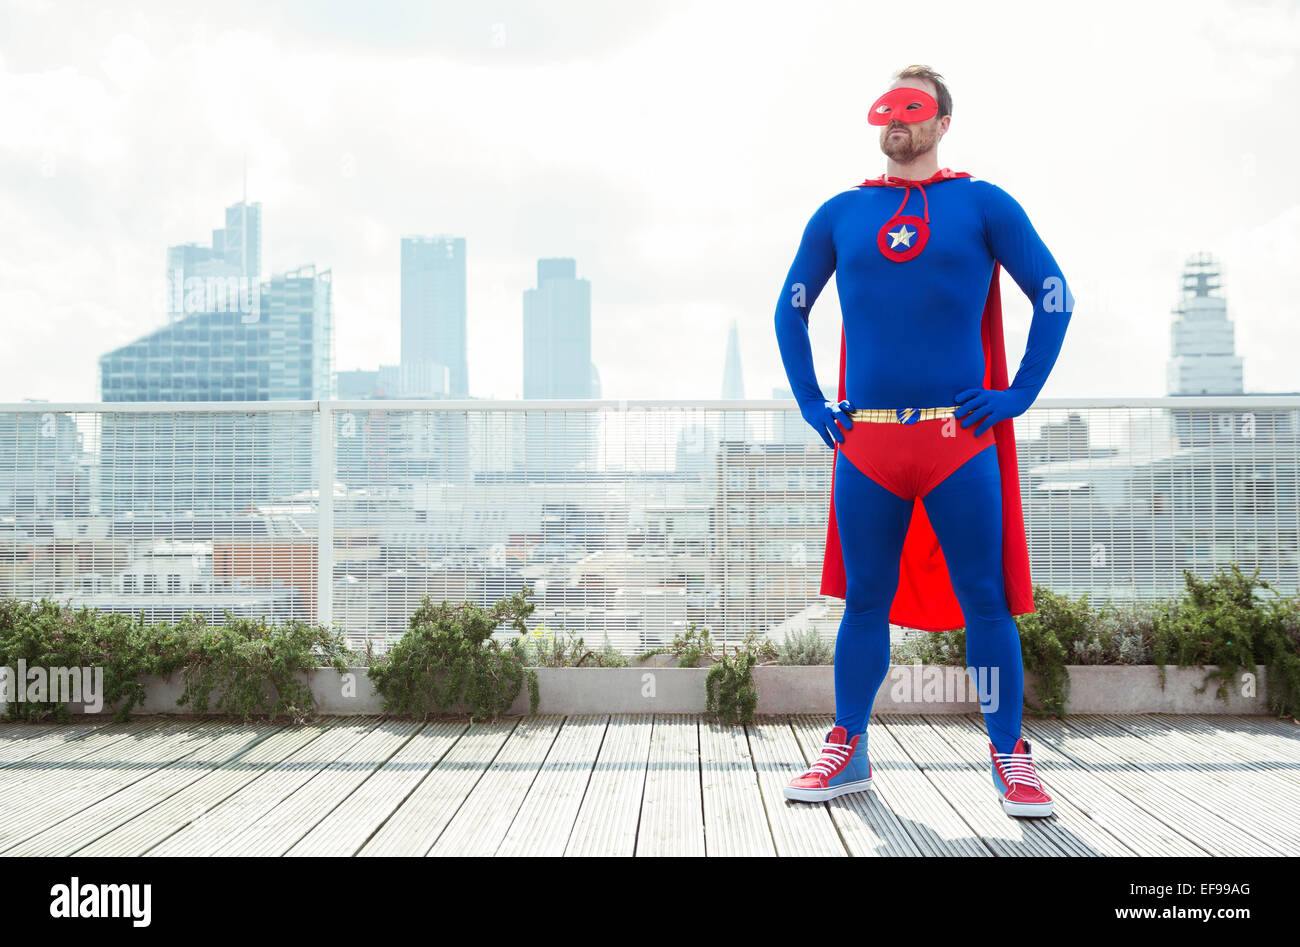 Superhero standing with hands on hips on city rooftop Stock Photo